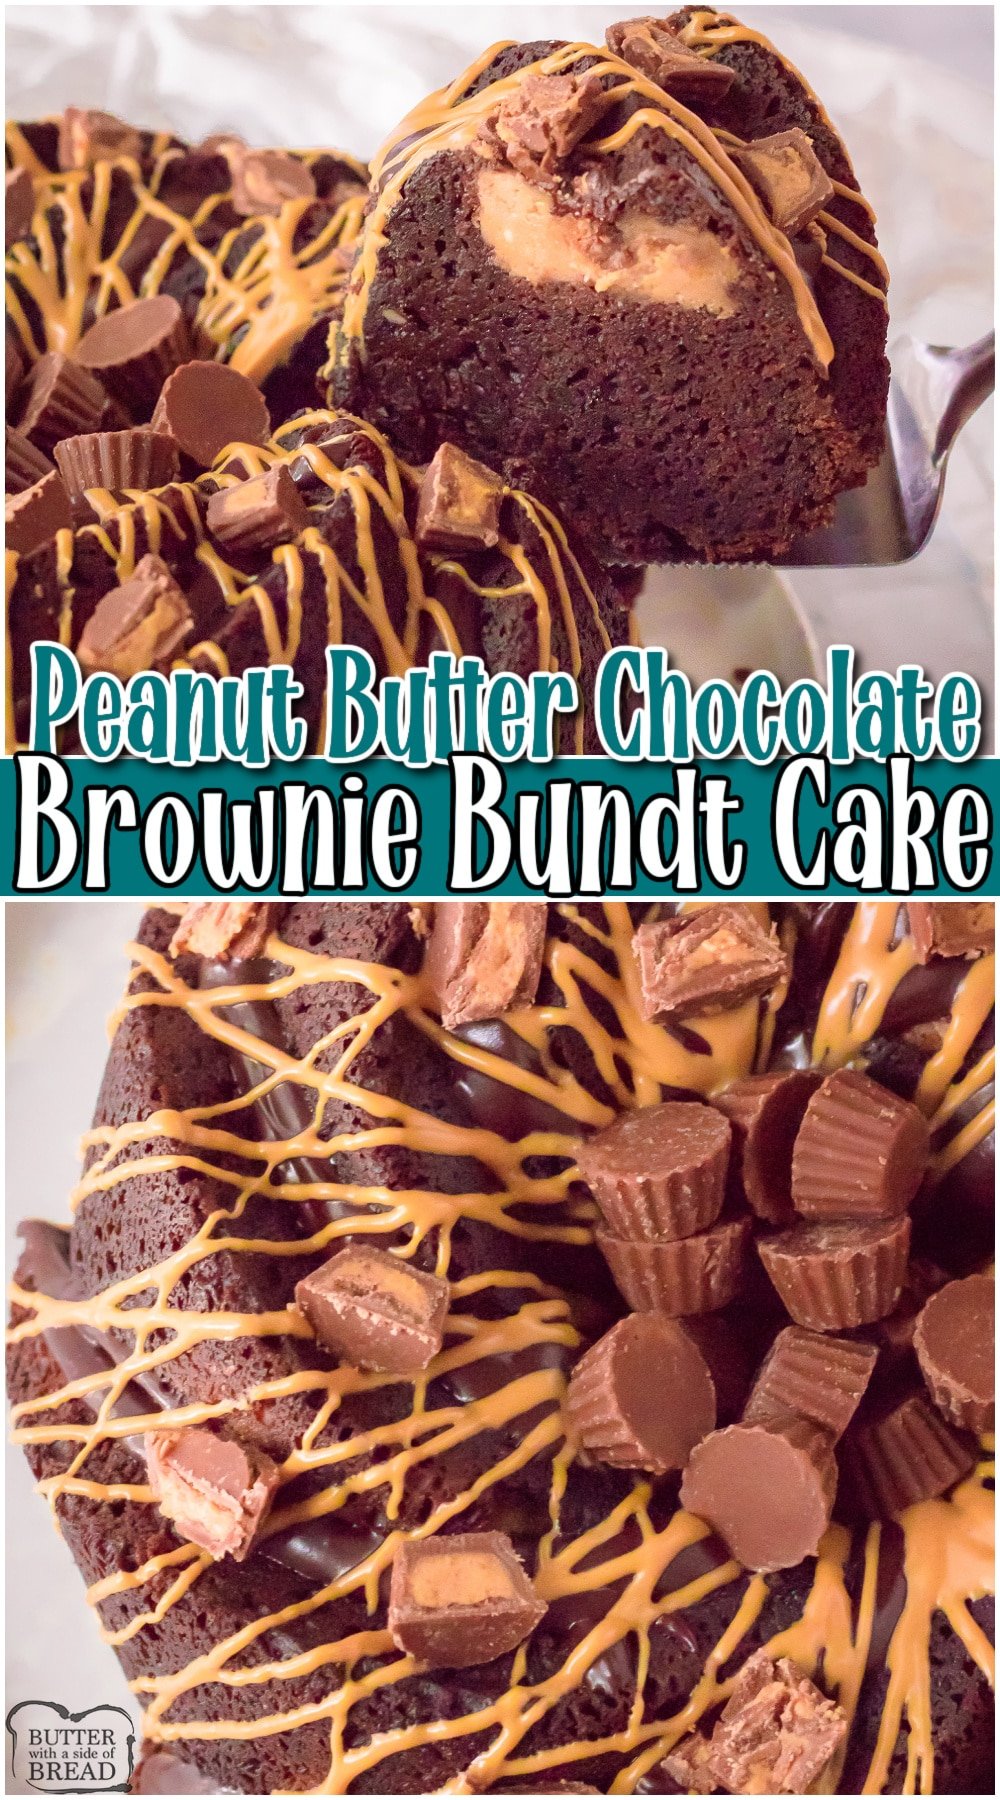 Peanut butter brownie bundt cake made with a cake mix & brownie mix combined! Fudgy chocolate cake filled with a decadent peanut butter cheesecake & drizzled with chocolate!